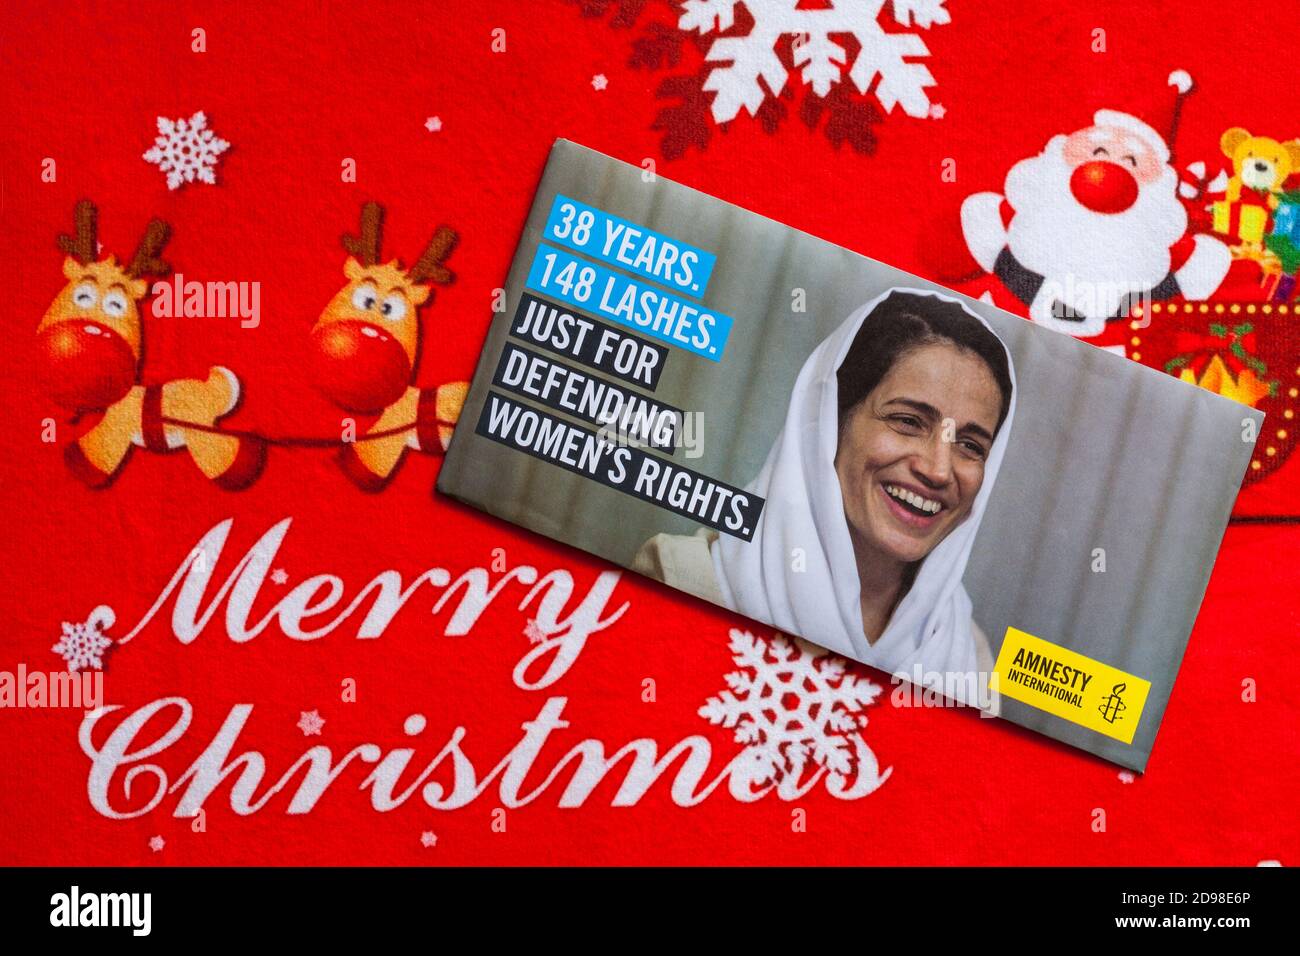 Post on Christmas mat - charity appeal, Amnesty International 38 years 148 lashes just for defending women's rights Stock Photo